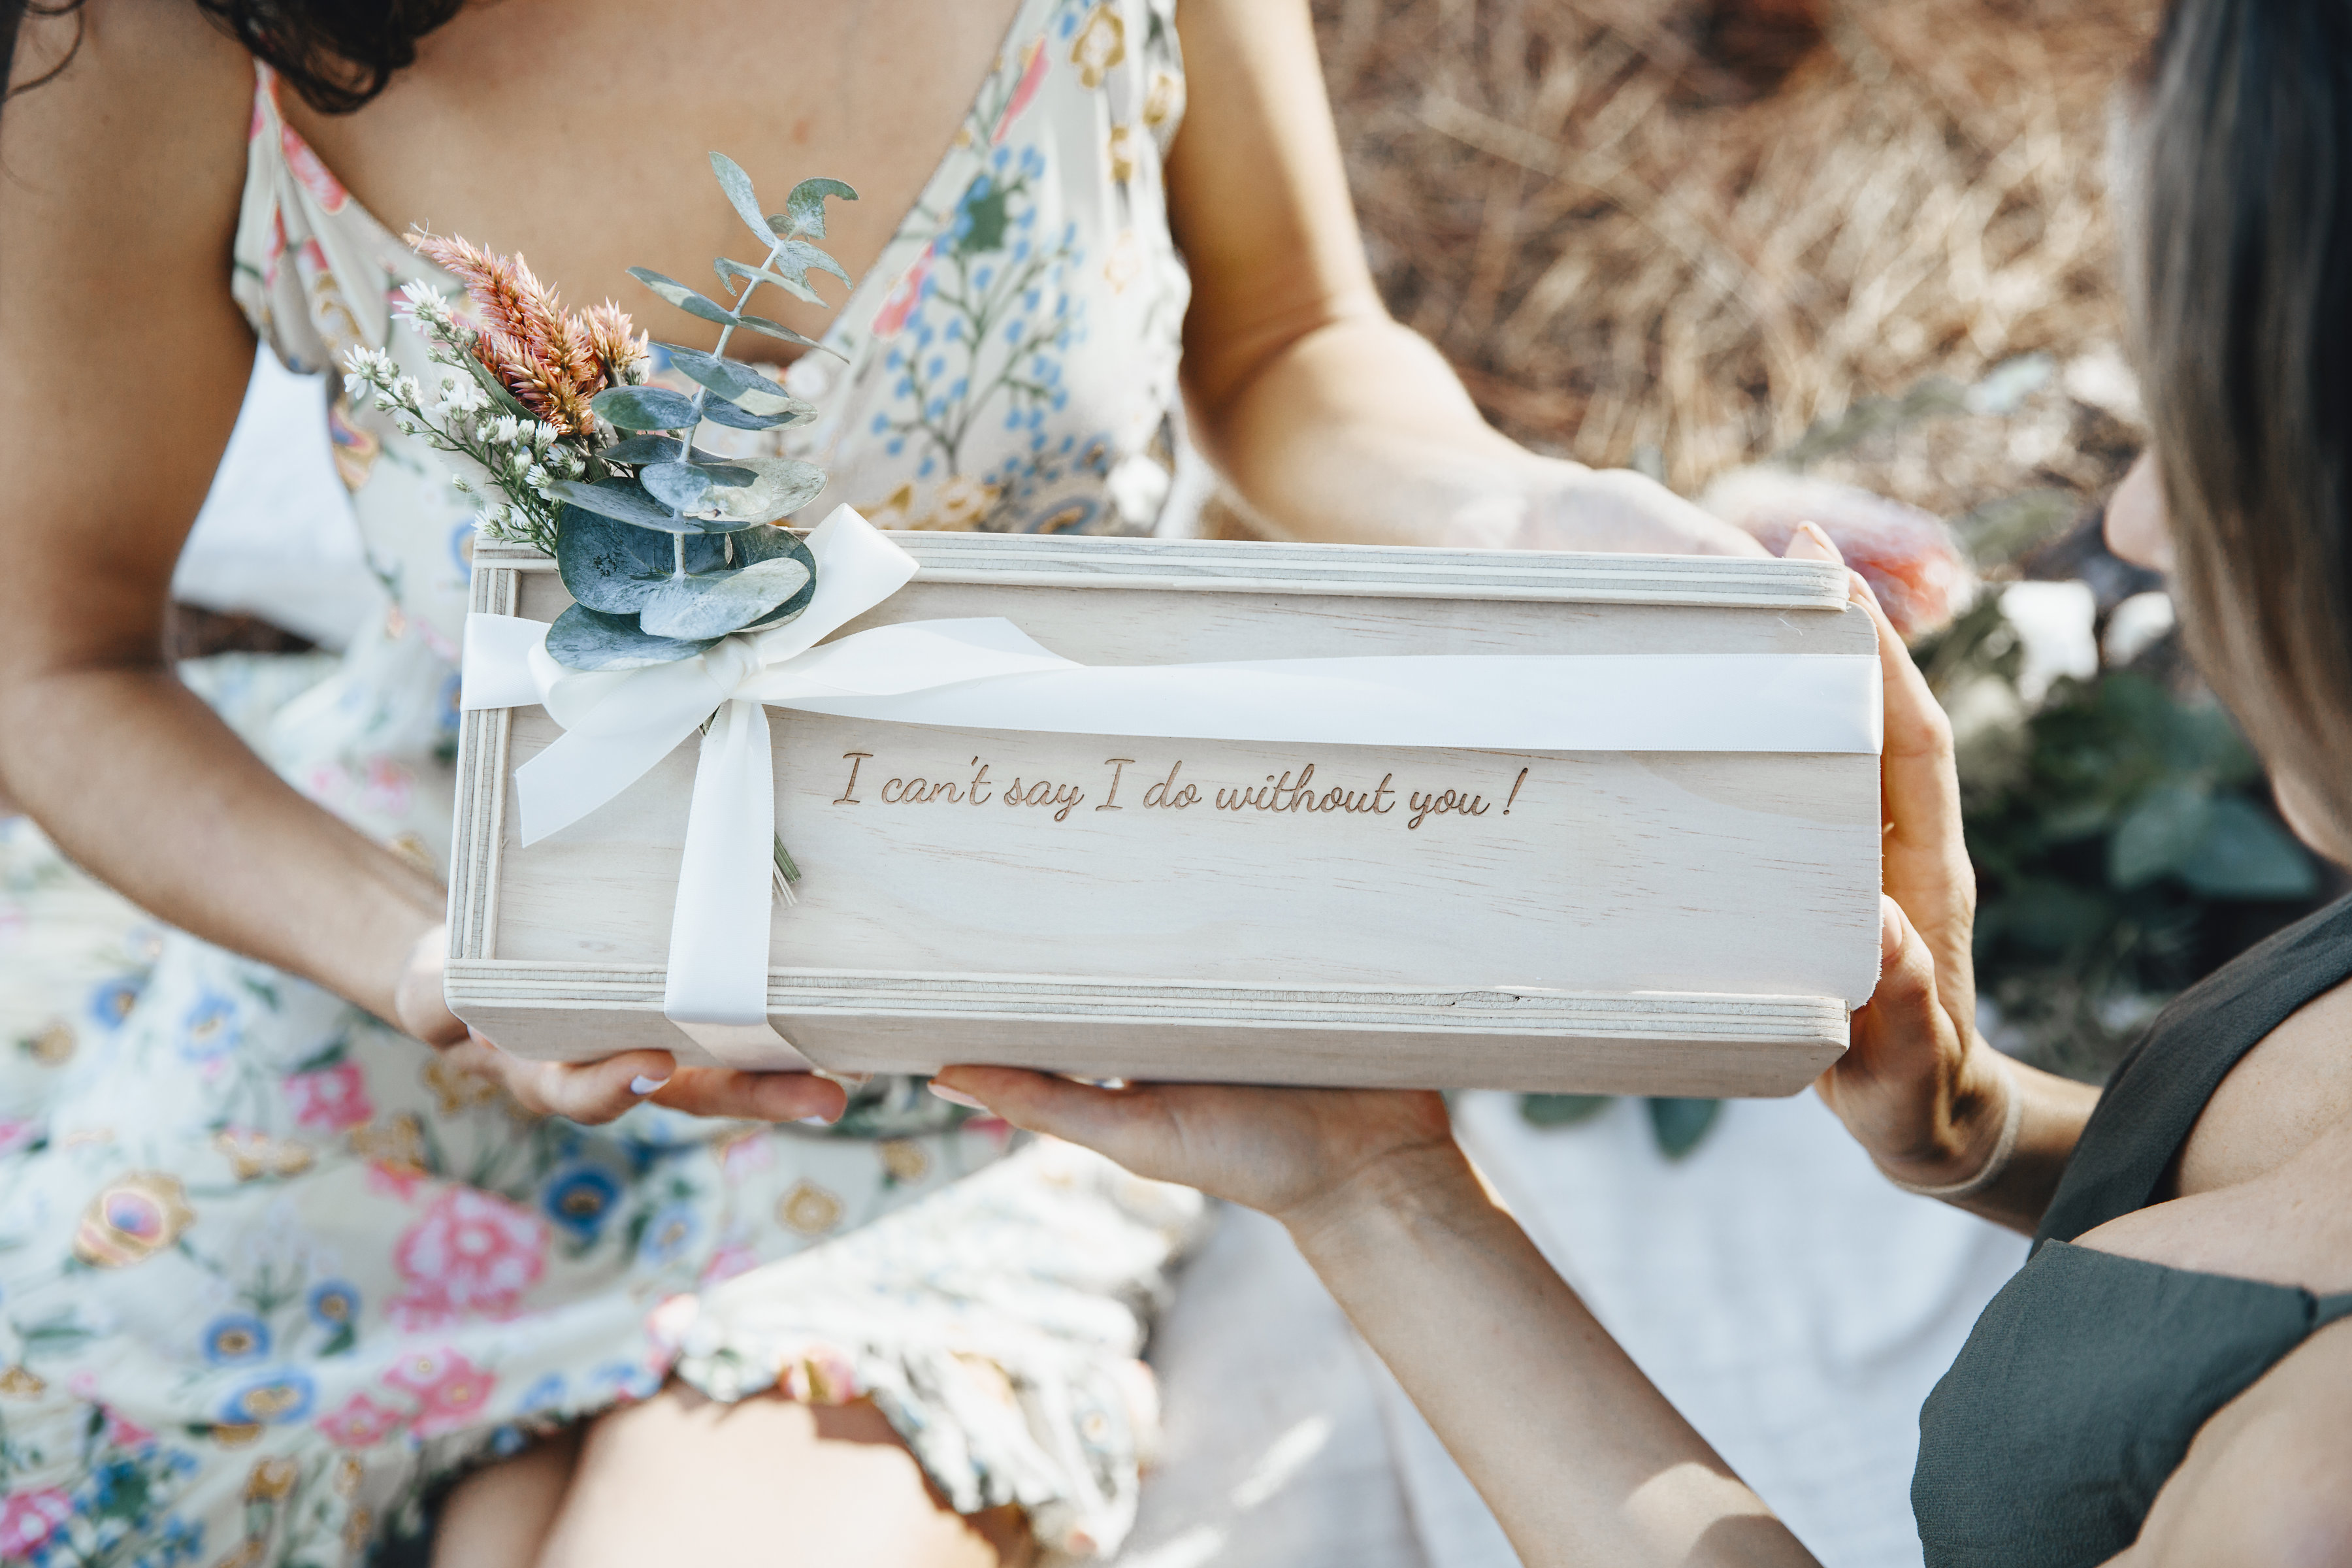 Bride to be handing a bridesmaid a keepsake gift box that reads "I can't say I do without you" for her bridesmaid proposal